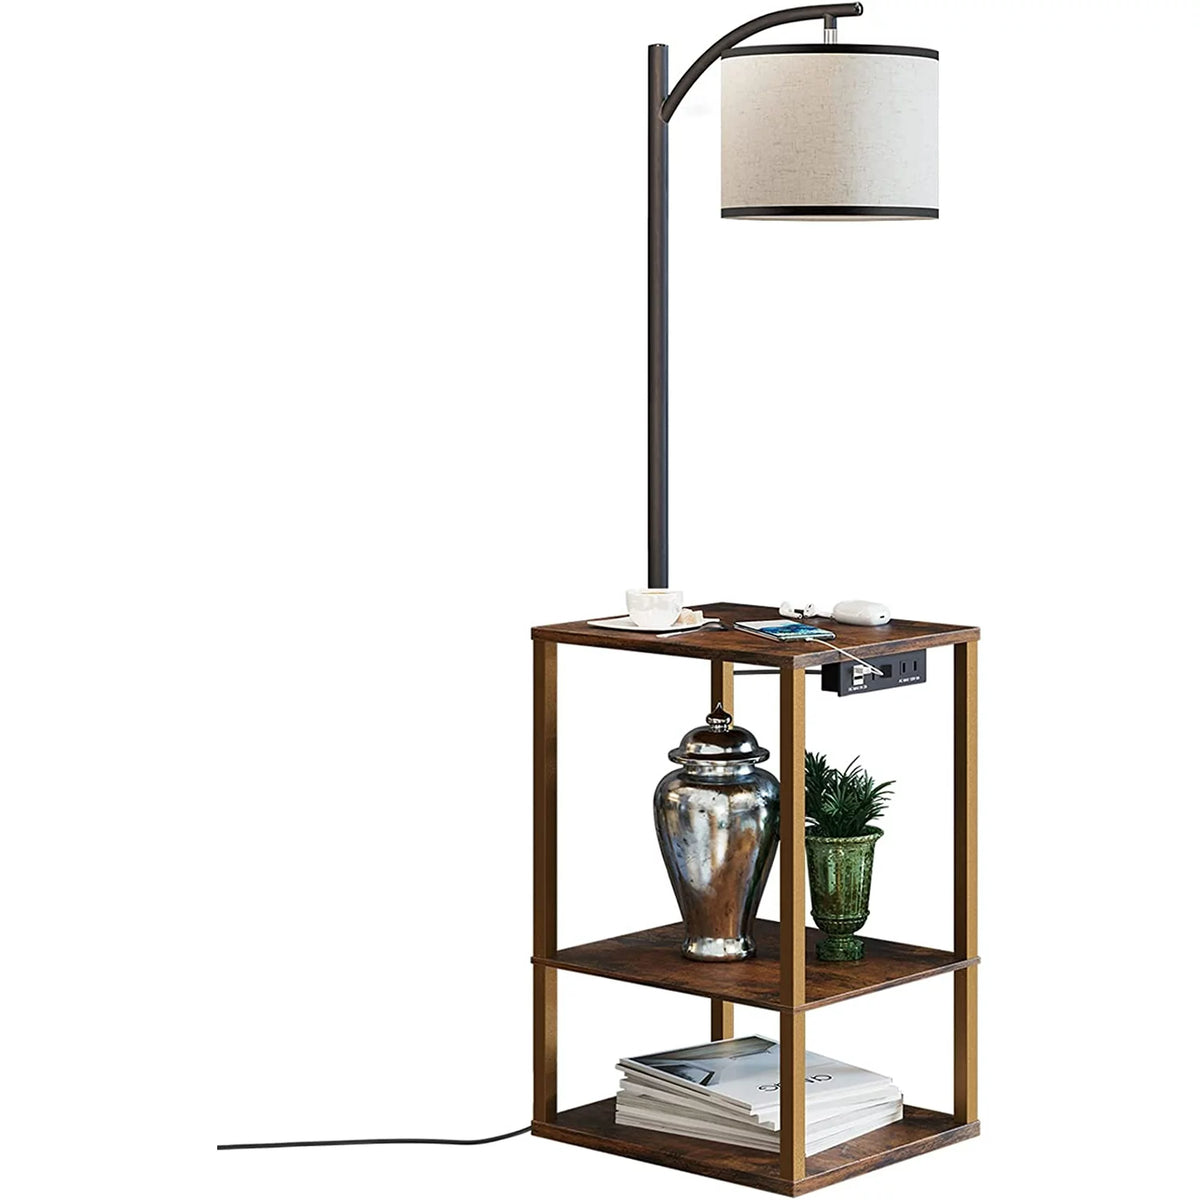 Floor Lamp with Table, USB Ports, and Shelves